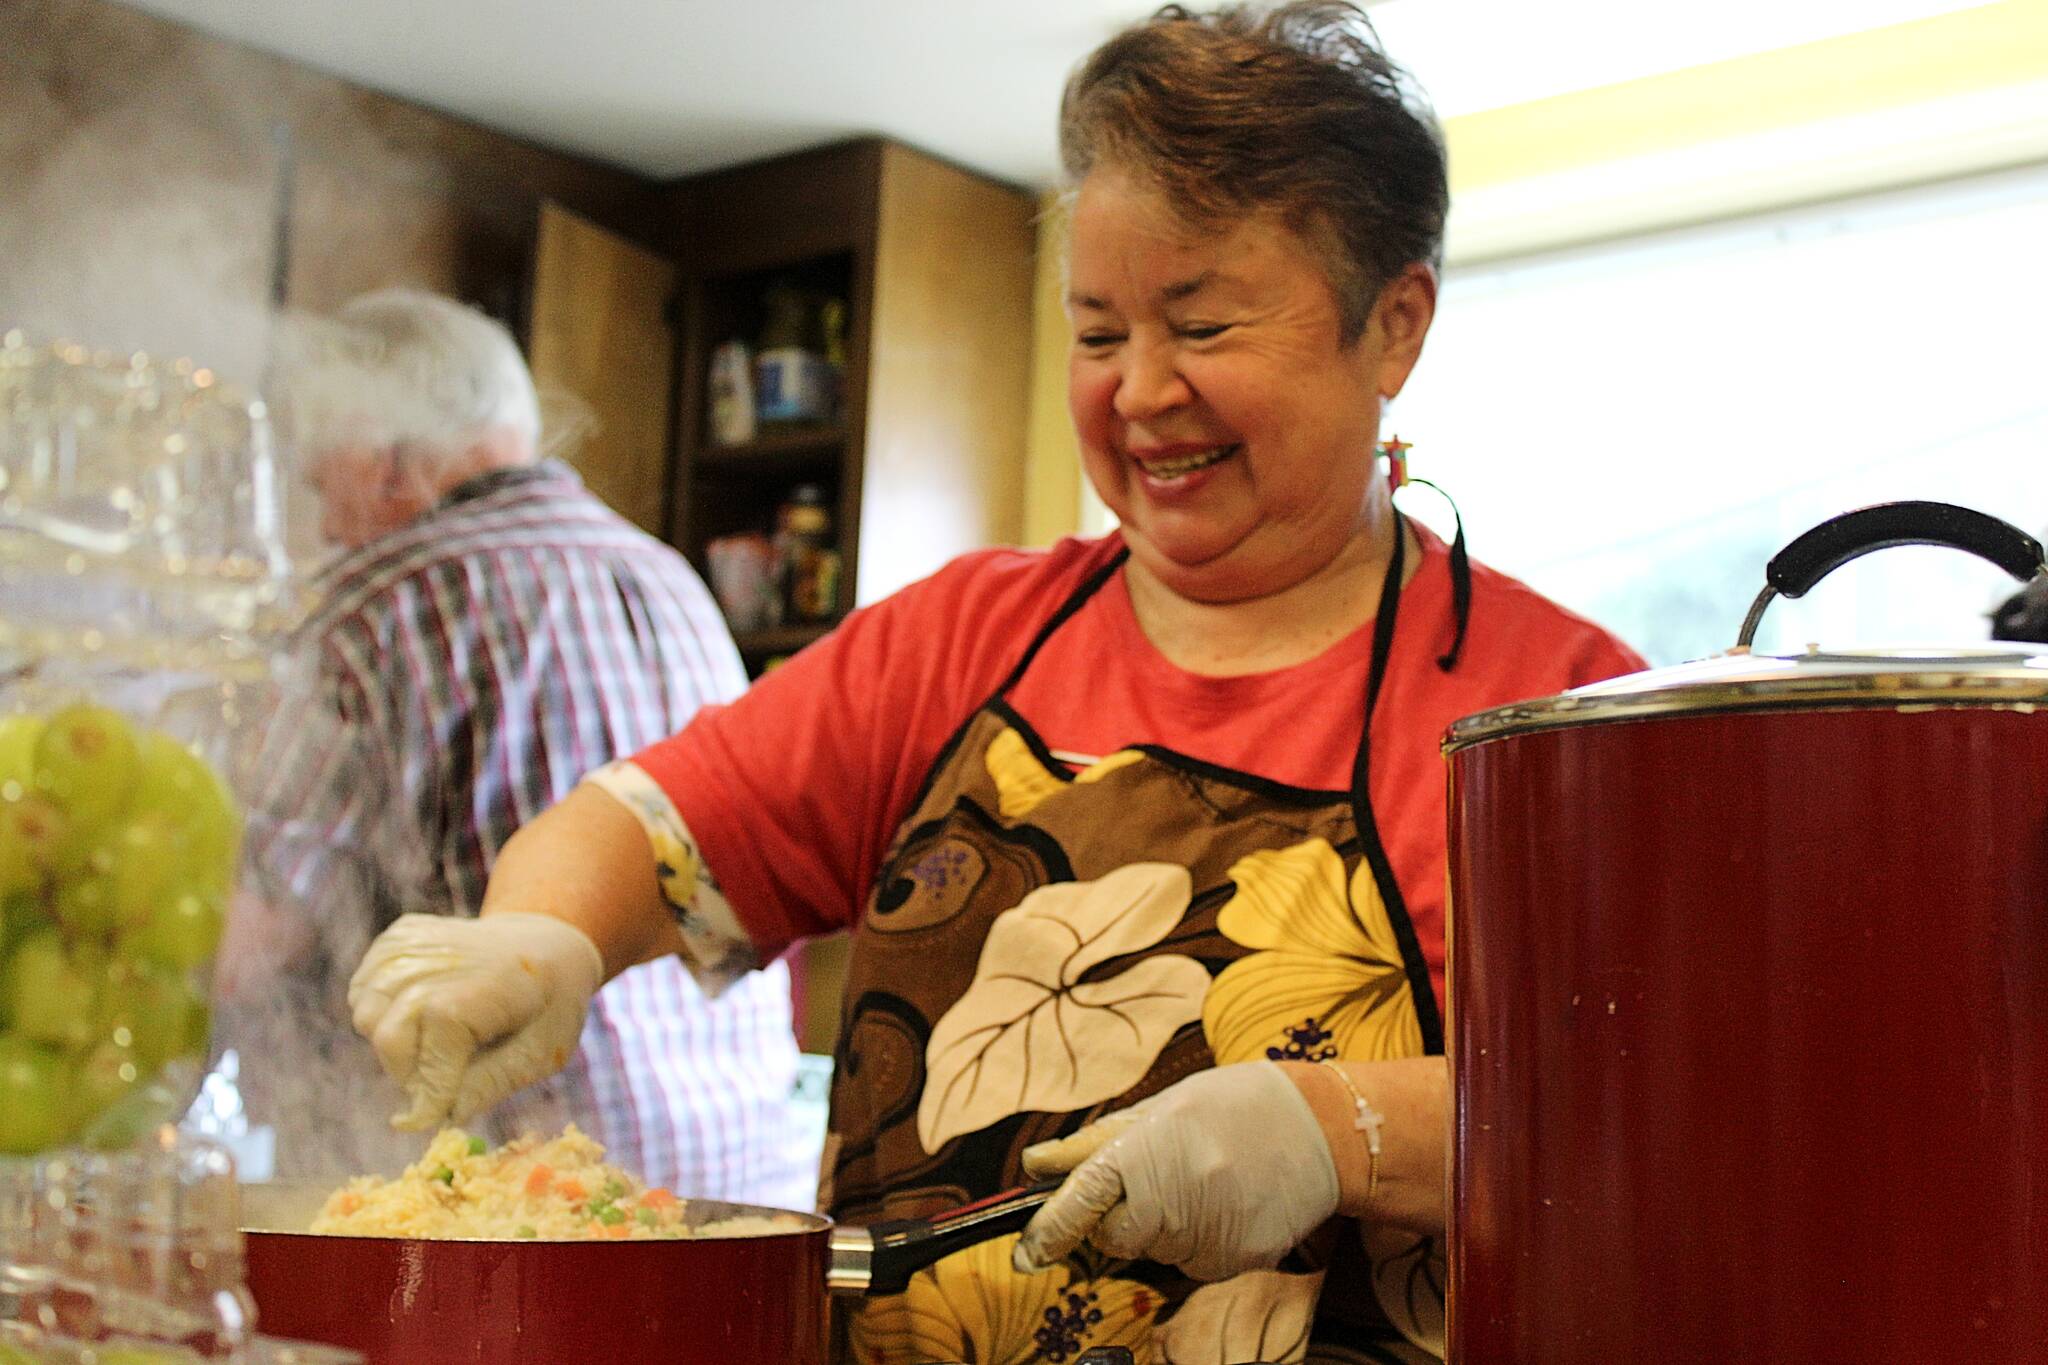 Mercedes Porras prepares a rice and veggies dish and shows off more homemade treats in these photos taken May 6 at the Church of the Good Shepherd. “We love Mercedes,” the volunteers agreed. Alex Bruell / The Mirror